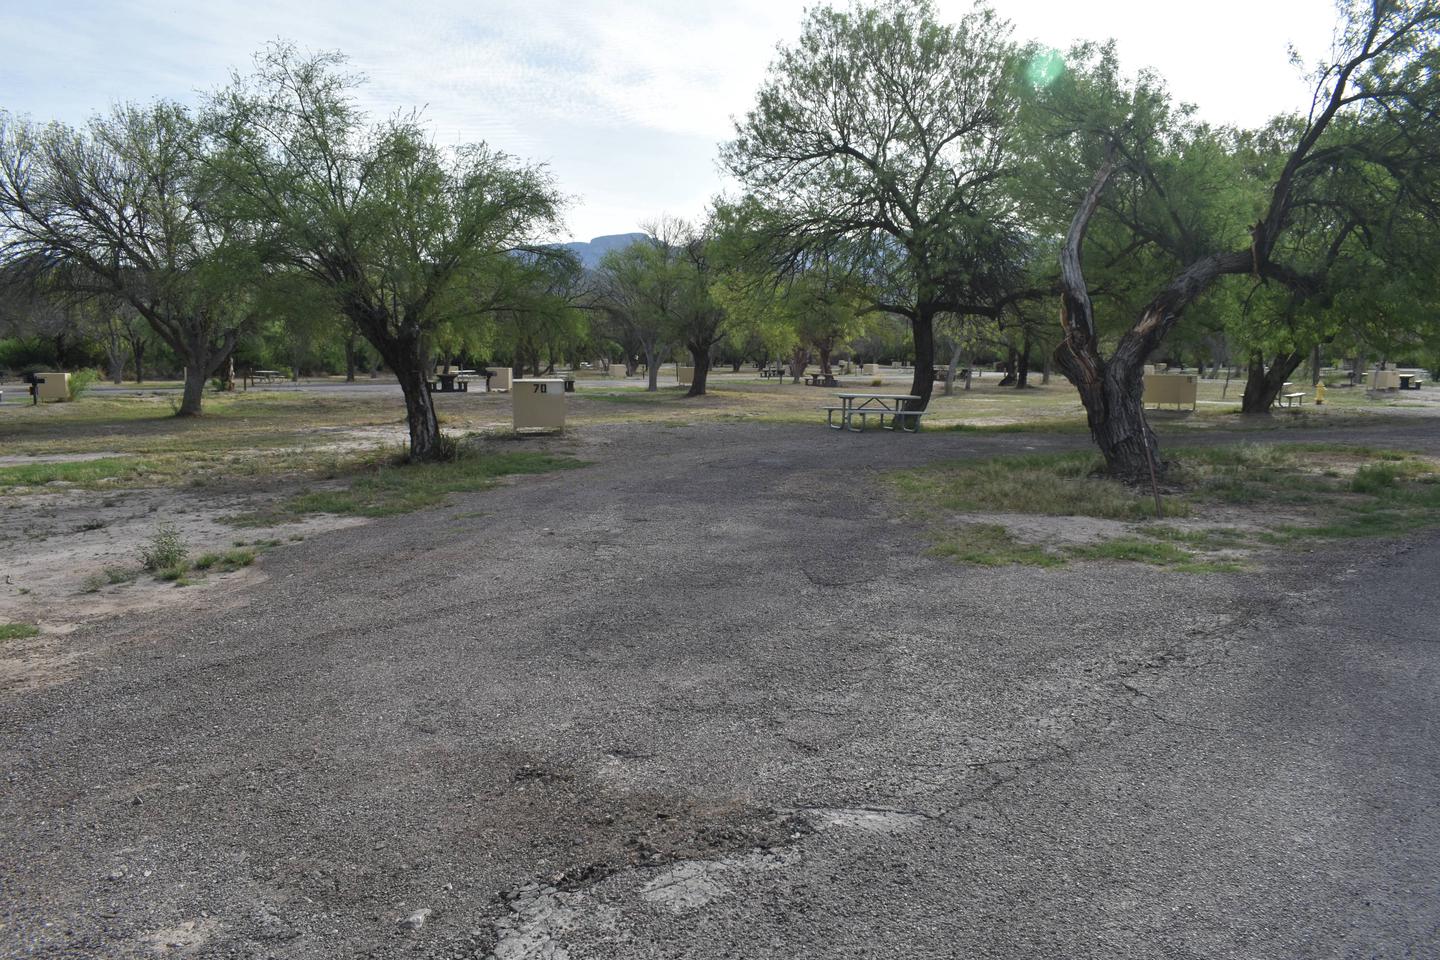 Distant view of parking area and camp site with shade treesParking and camping area Site 70